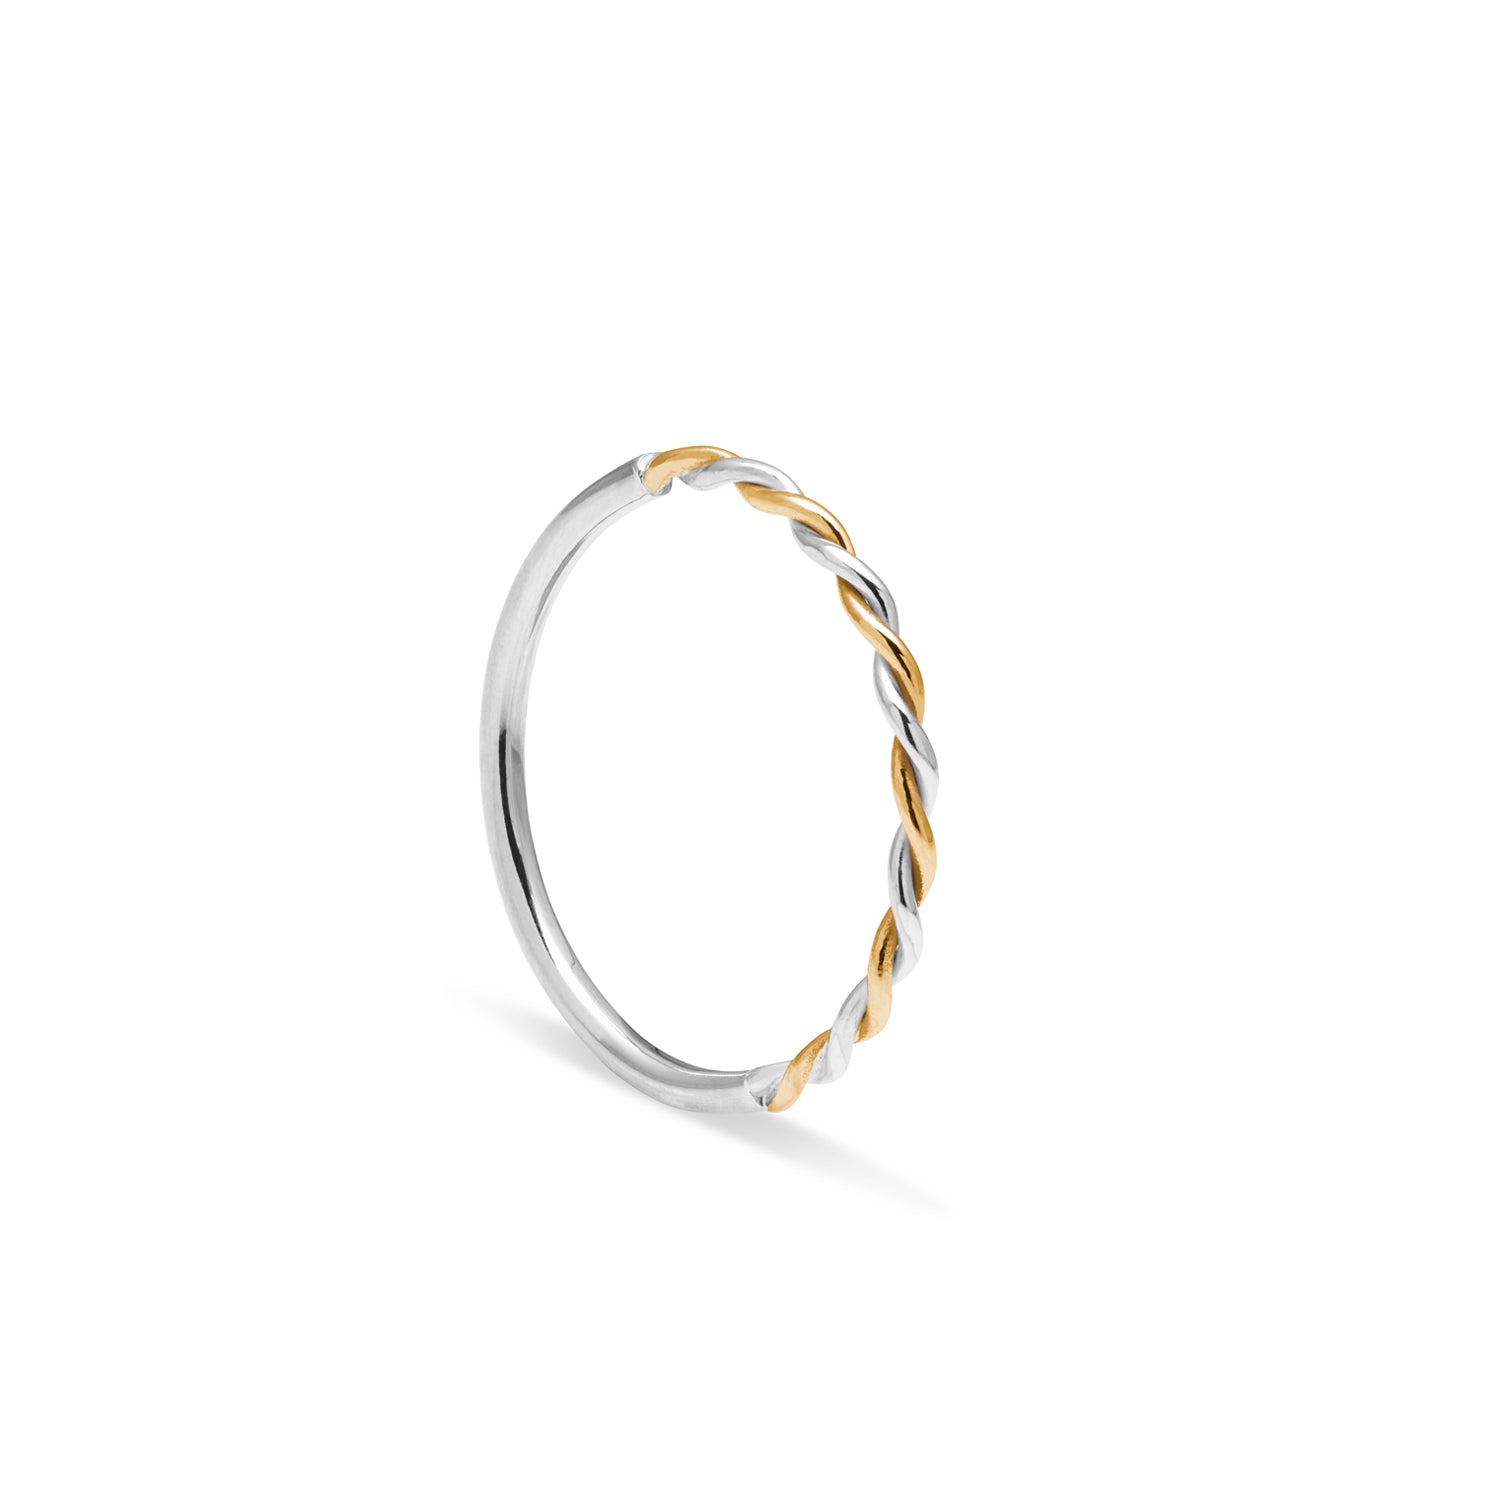 Two-tone Twisted Paradox Ring - 9k Yellow Gold & Silver